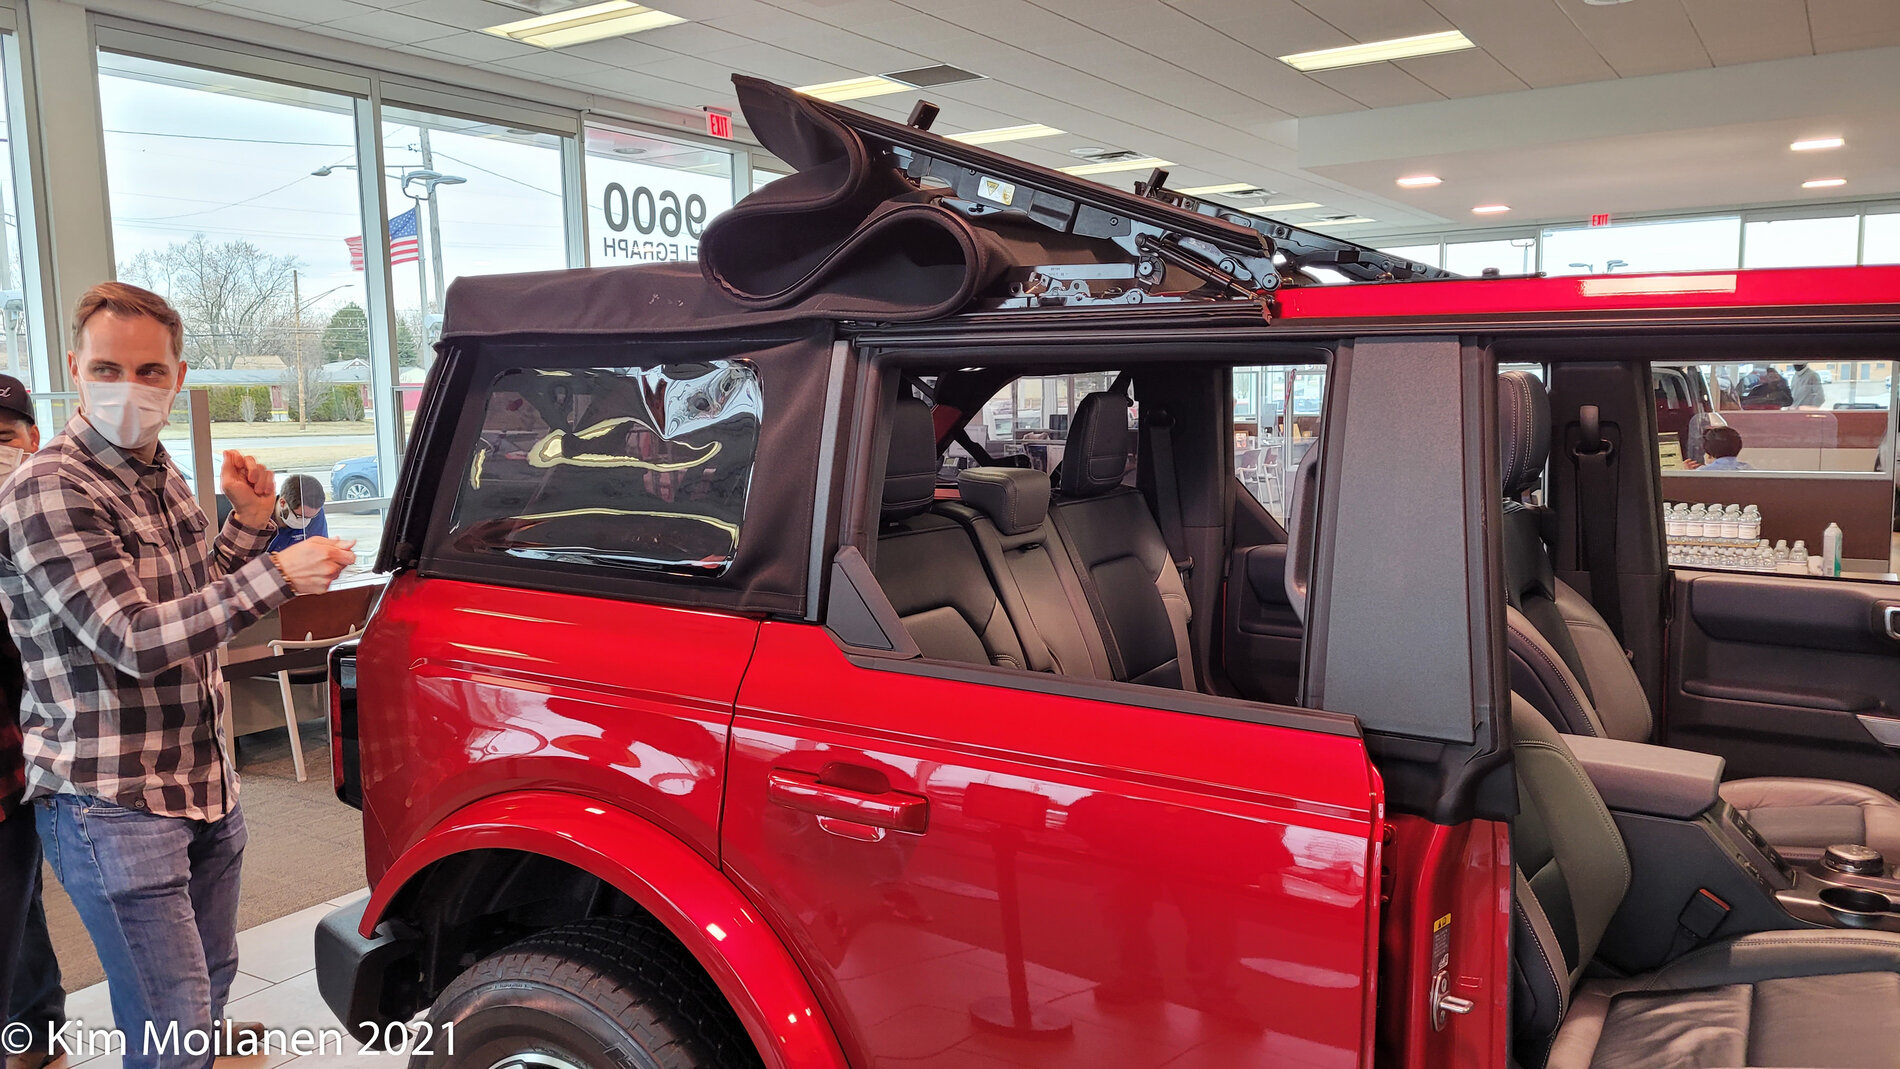 Ford Bronco Bronco Event at Pat Milliken Ford 03/18 - Rapid Red Outer Banks 4-Door cd2f0b7441b6f887560--carnival-images-amazon-kindle